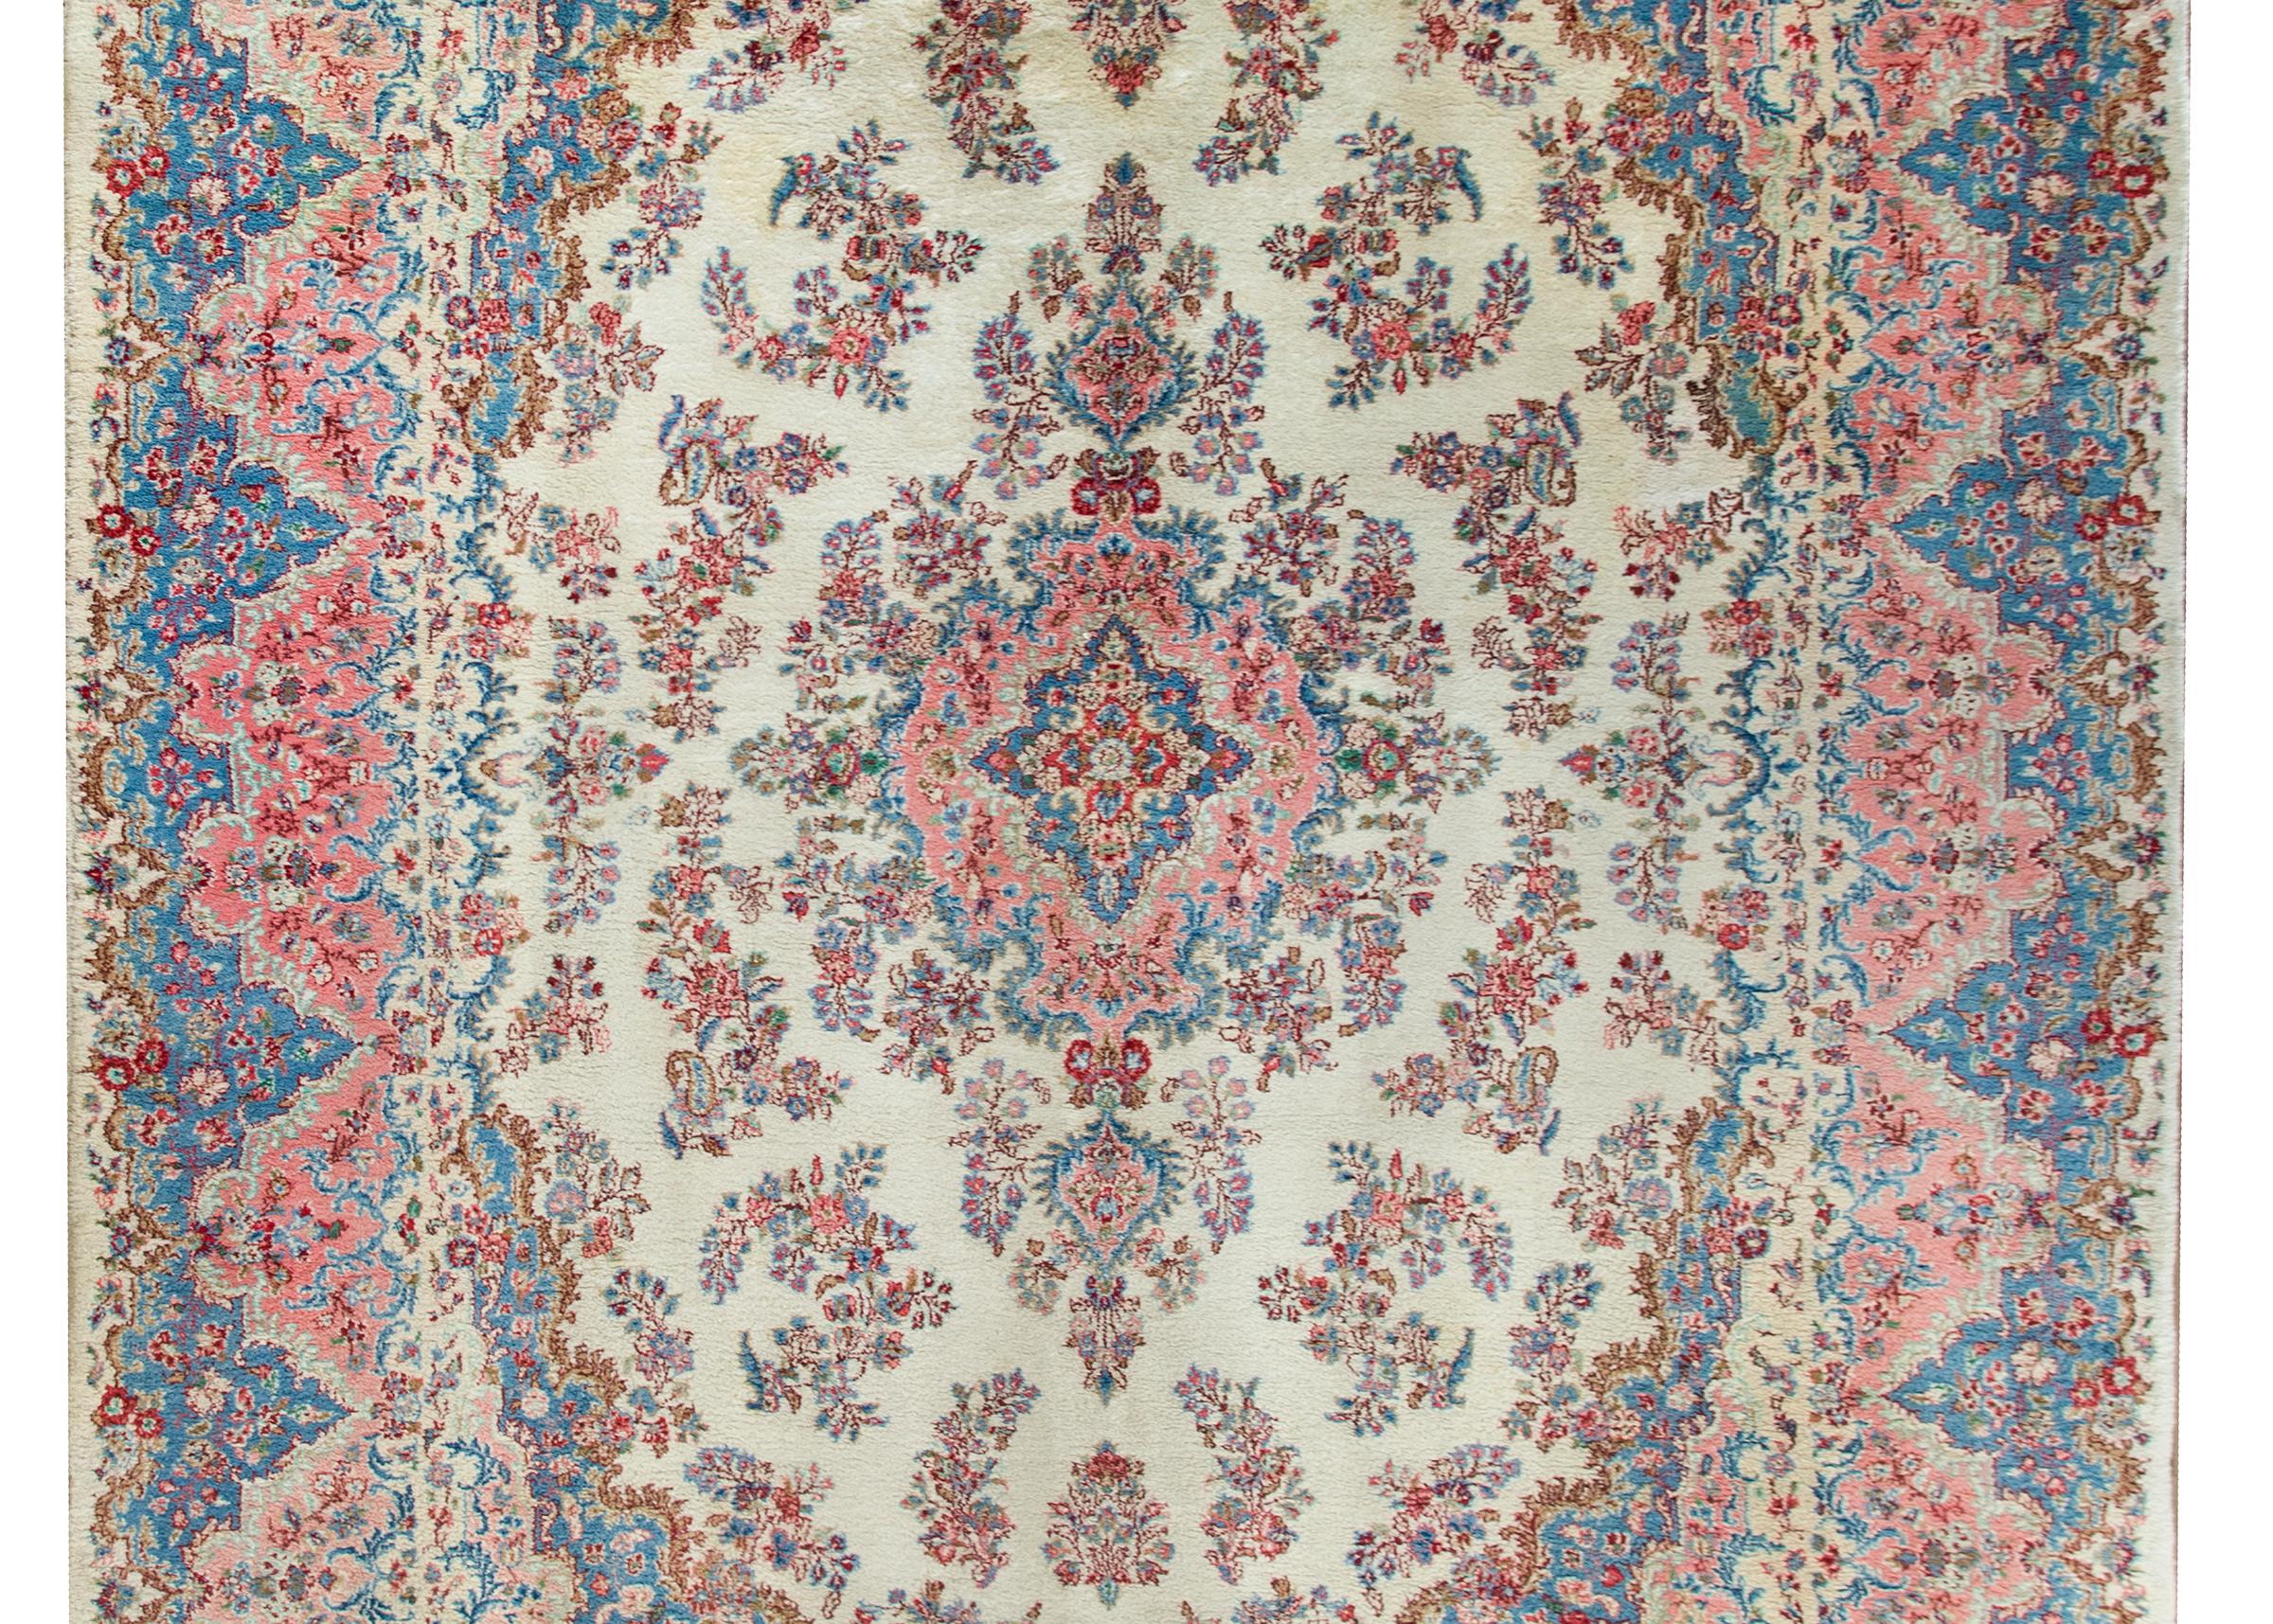 A stunning early 20th century Persian Kirman rug with a mesmerizing floral pattern radiating out from the center, and woven in pinks, indigos, crimsons, and whites. The border is extraordinarily wide with a wonderful floral pattern similar to the